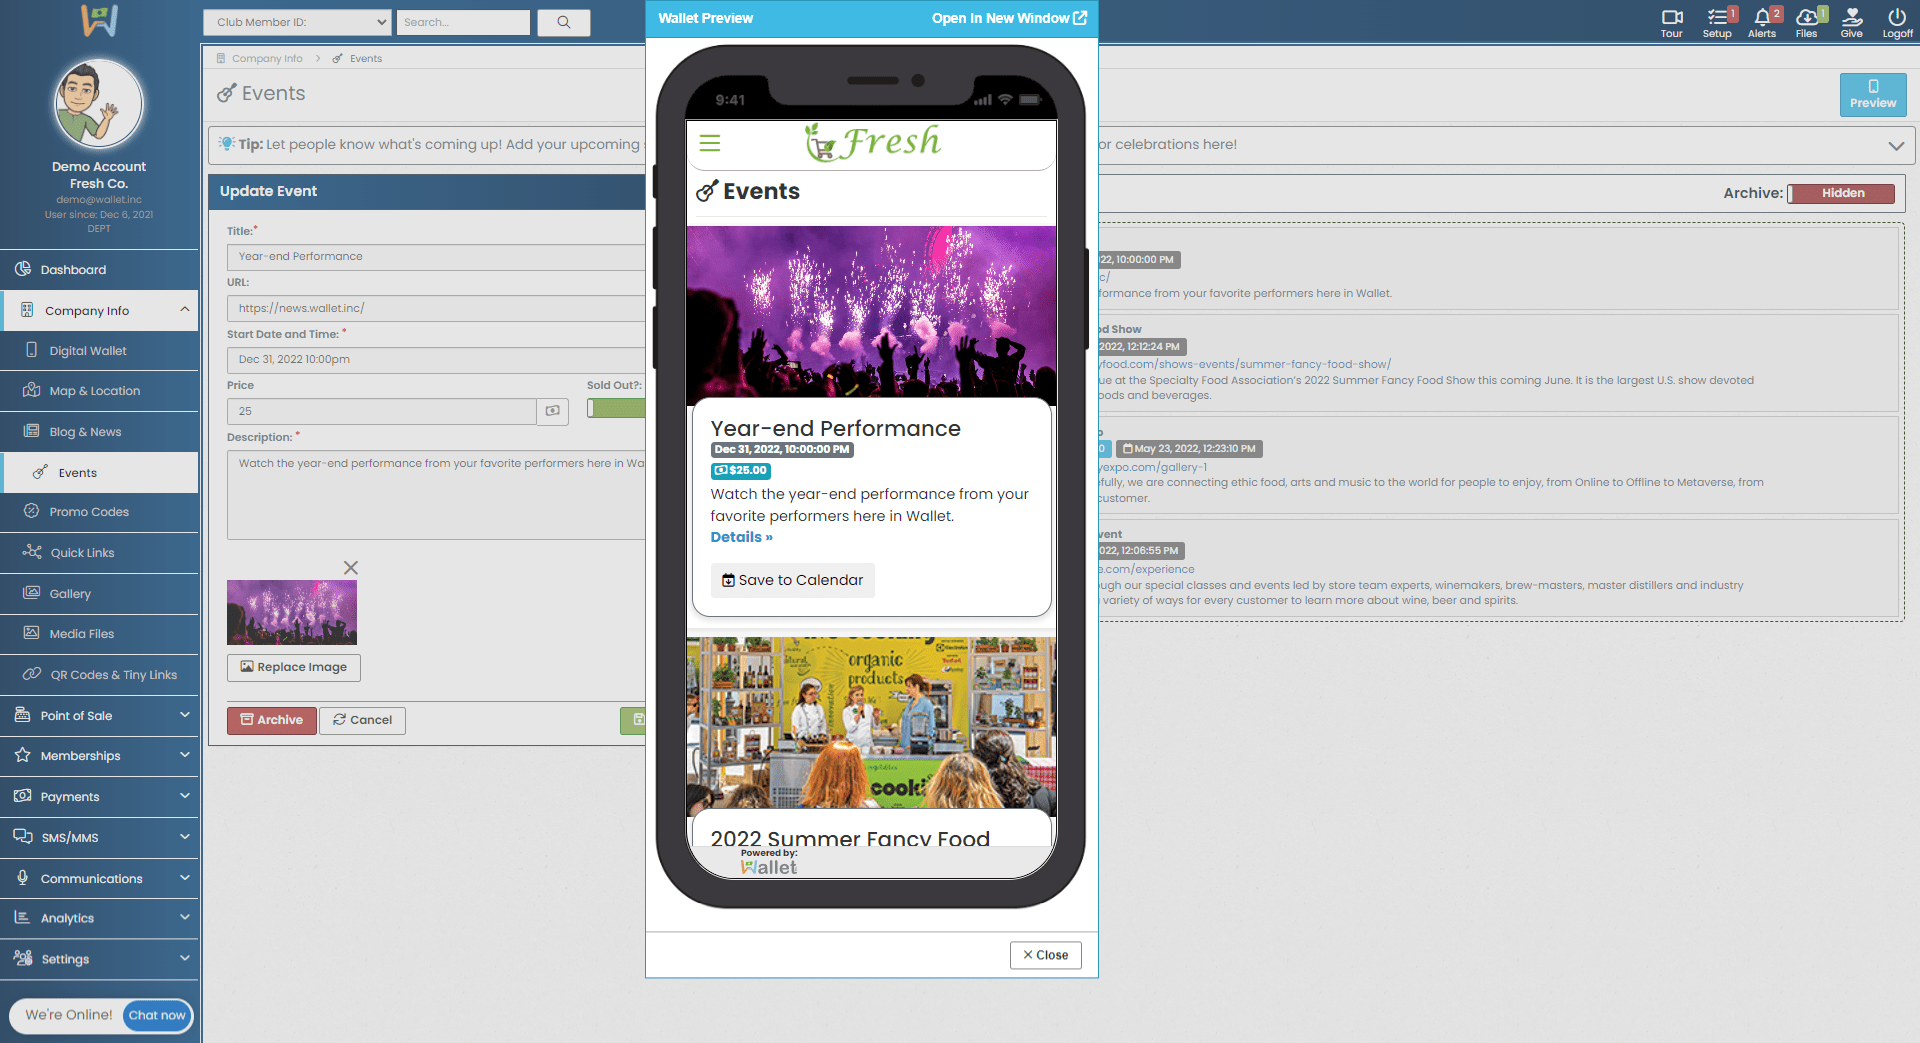 See exactly what your customers will see in the Live Events area of your Wallet